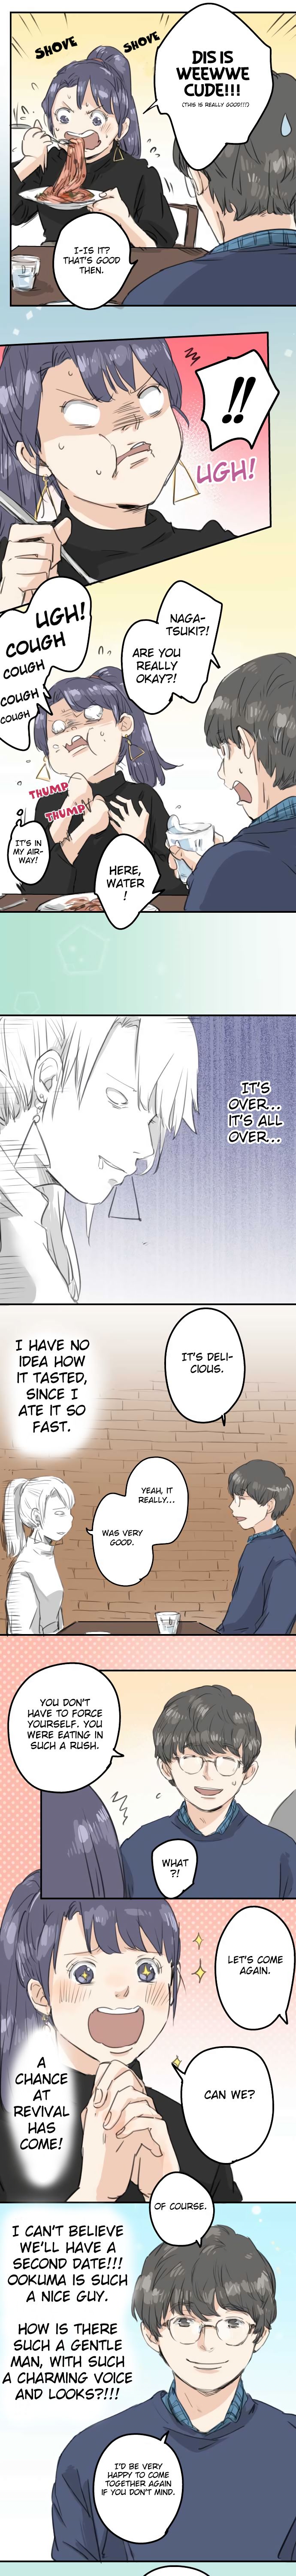 Koi Inu Ch. 134 You Have to Eat Hot Dogs When Tracking Somebody!